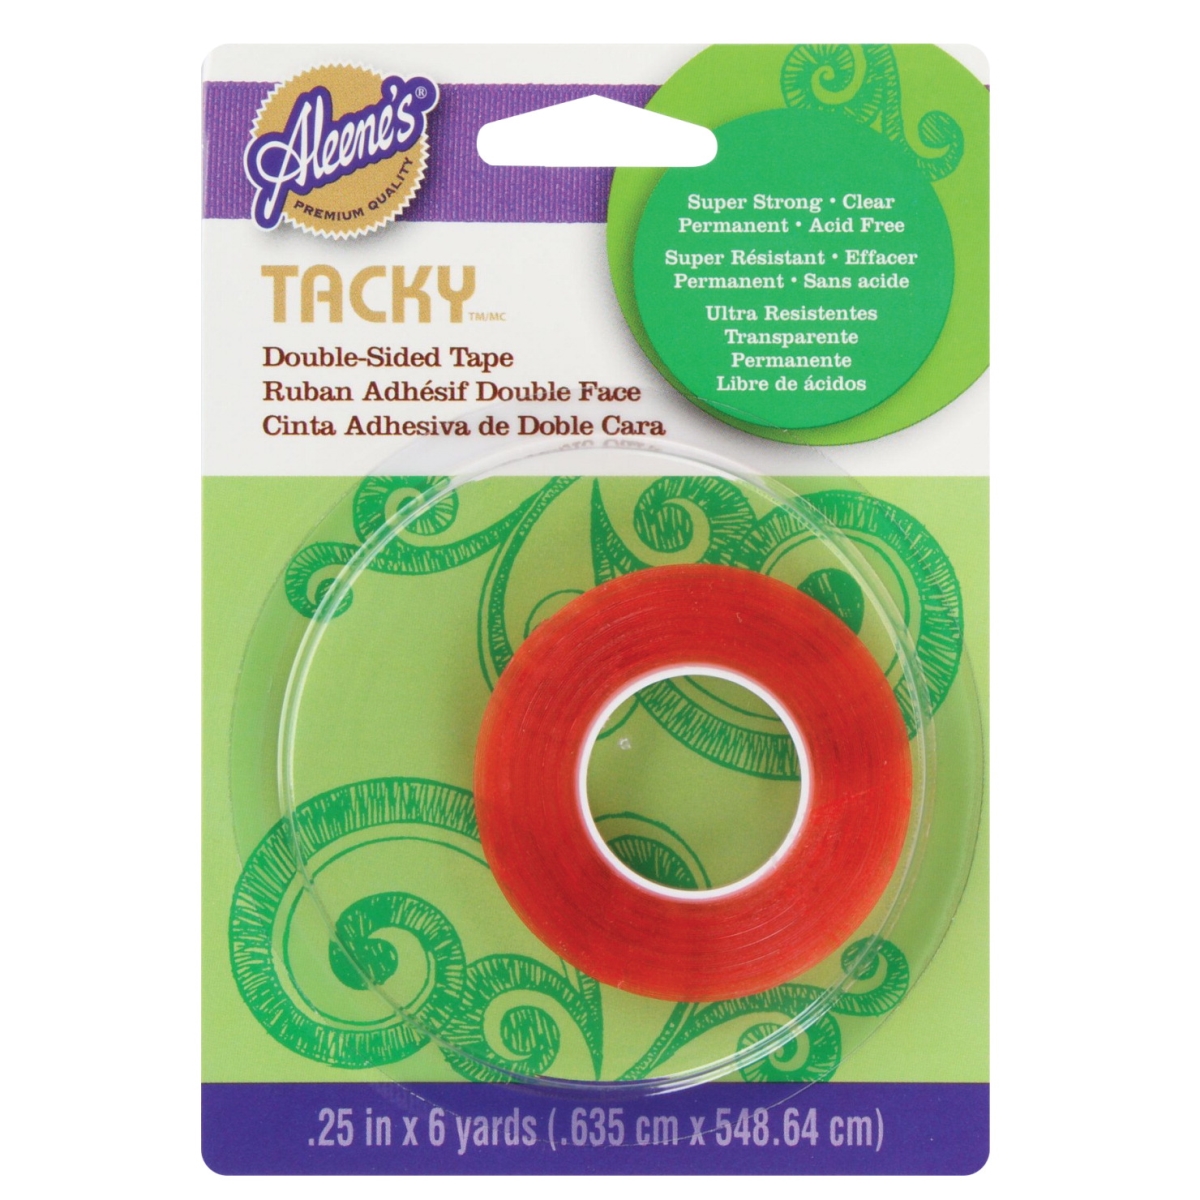 0.25 In. X 6 Yards Double Sided Tacky Tape, Red